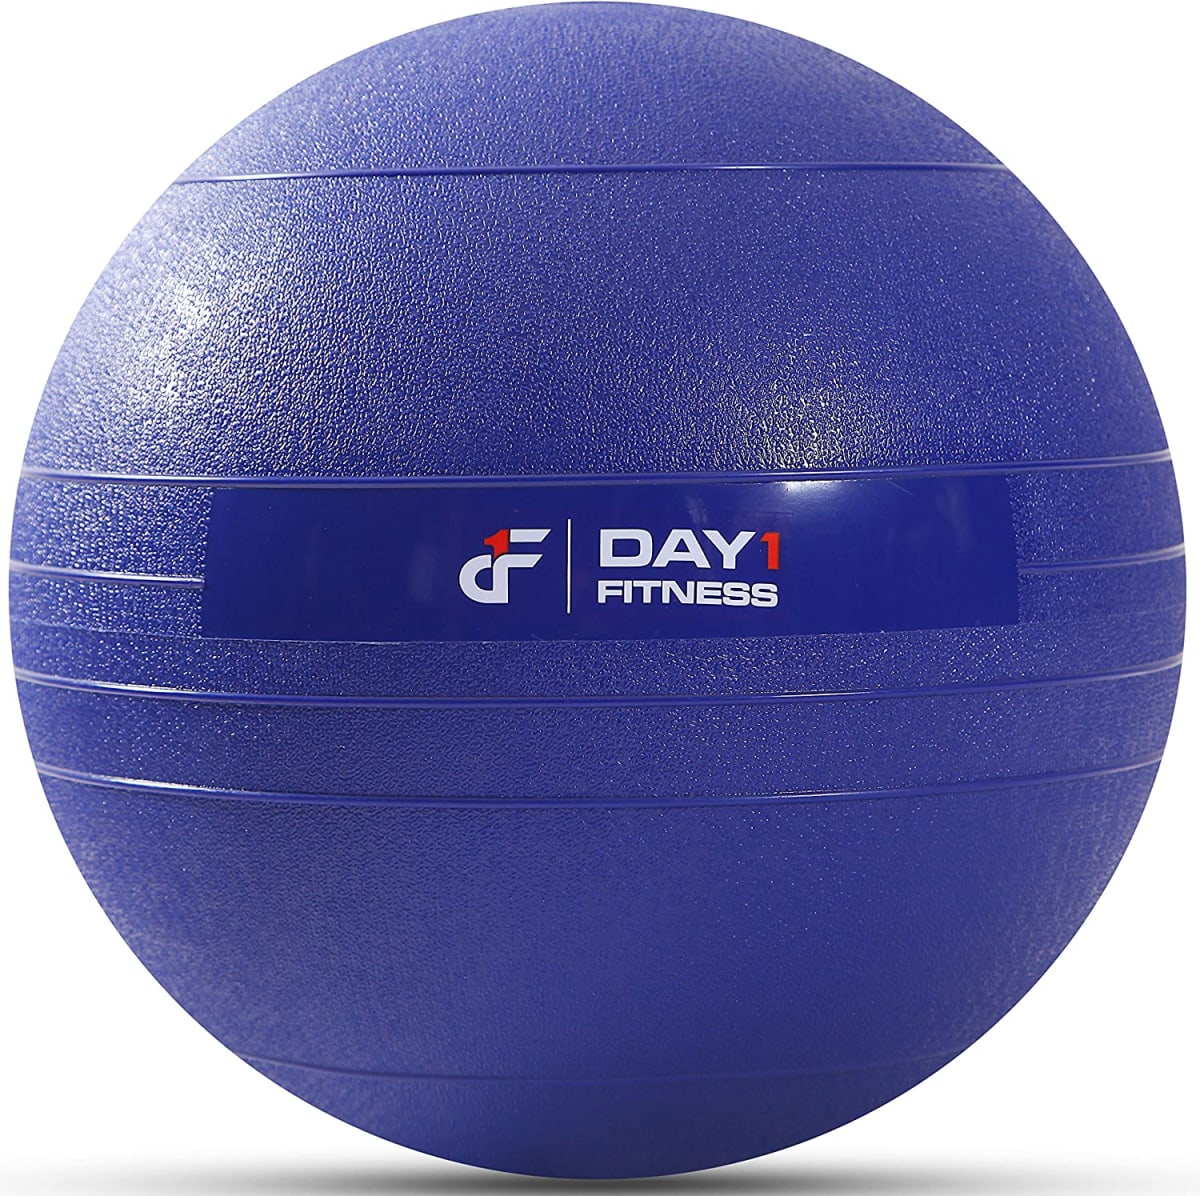 Weighted Slam Ball - 9 Weight and 3 Color Options - No Bounce Medicine Ball - Gym Equipment Accessories, High Intensity Exercise, Functional Strength Training, Cardio